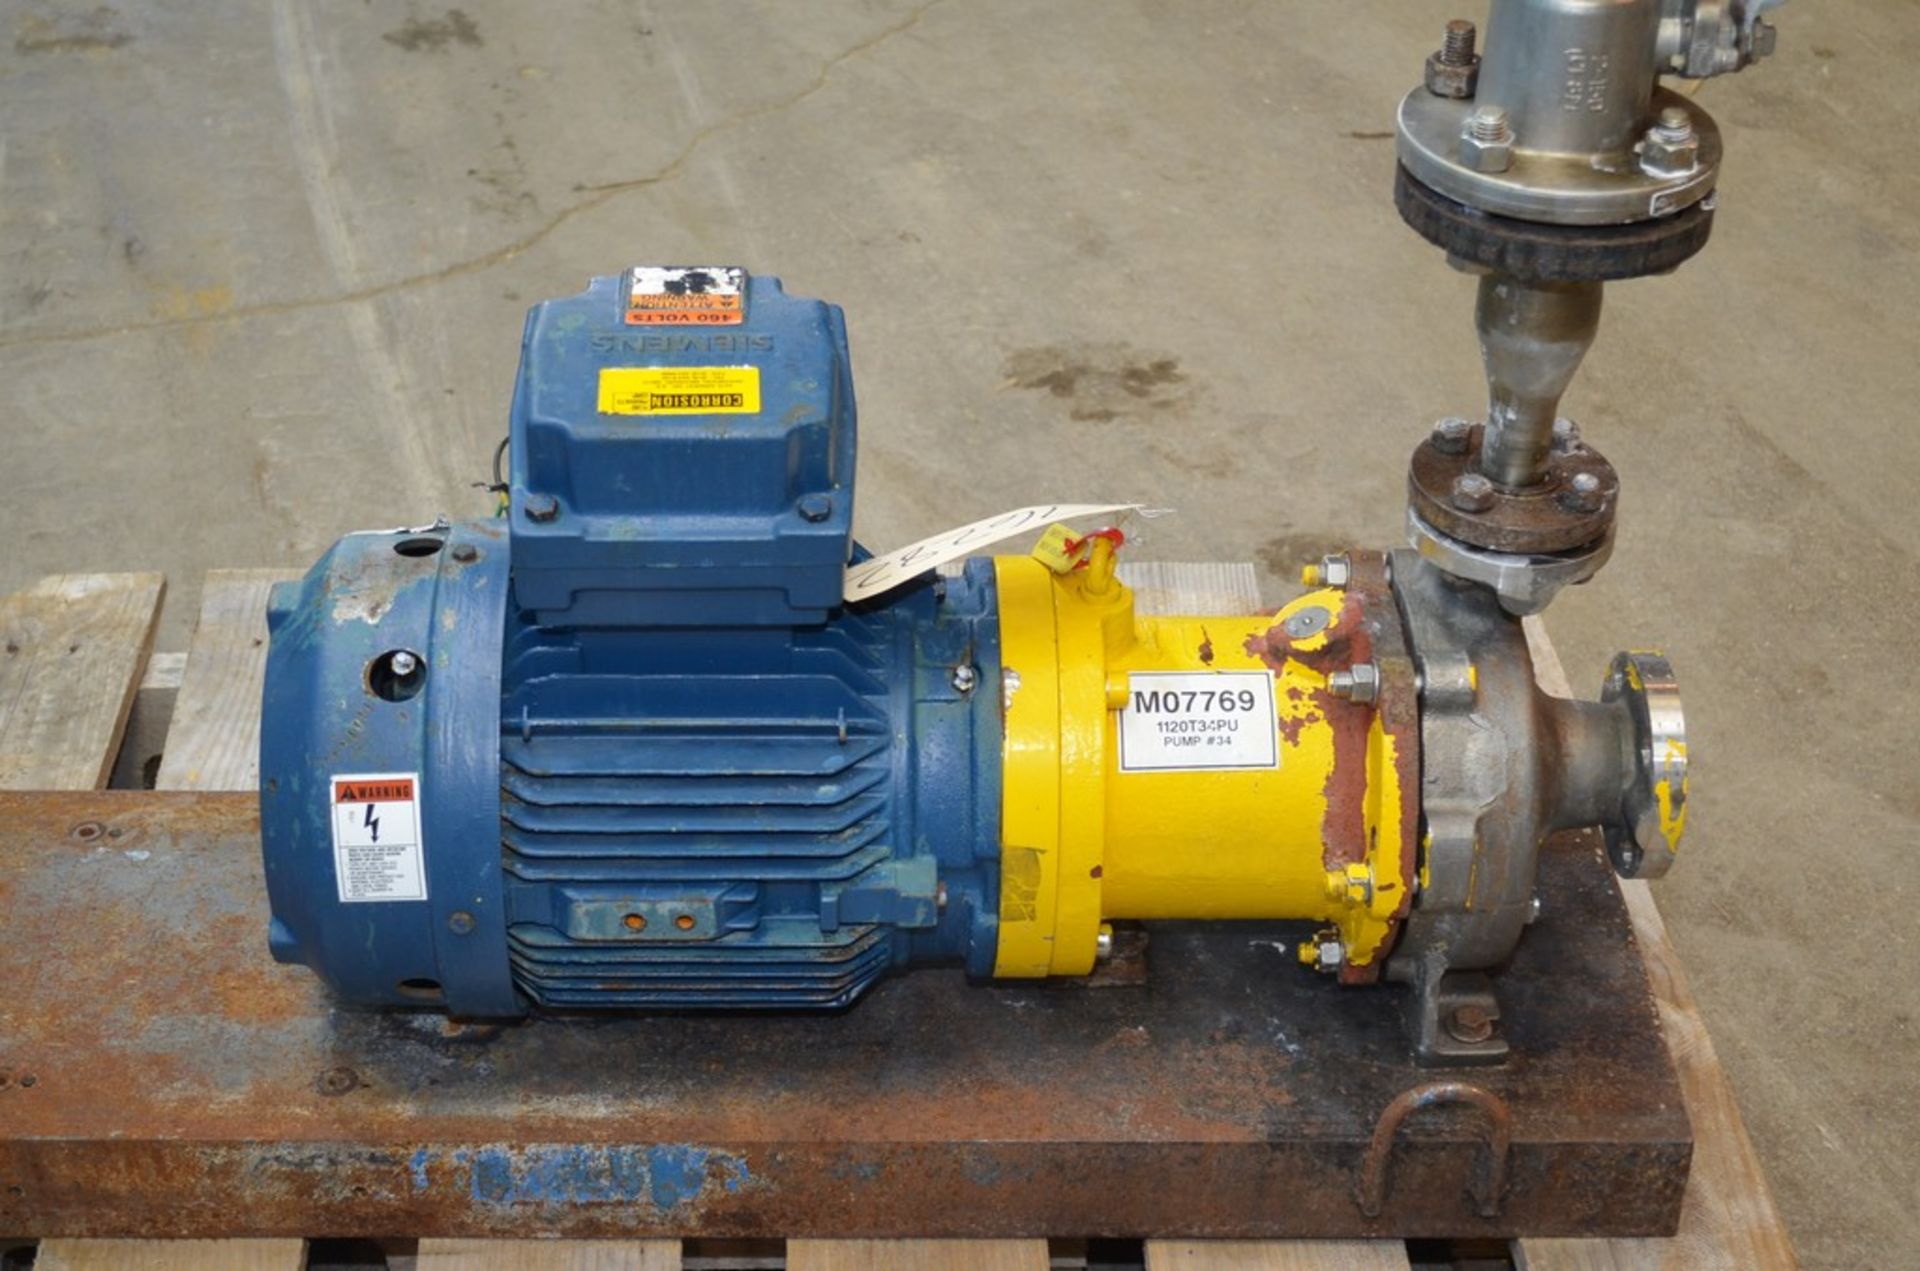 Kontro GSA 7.5 HP 316 S/S Centrifugal Pump. Size 1.5 x 1 x 6. Approximately 60 Gallons Per Minute at - Image 4 of 7